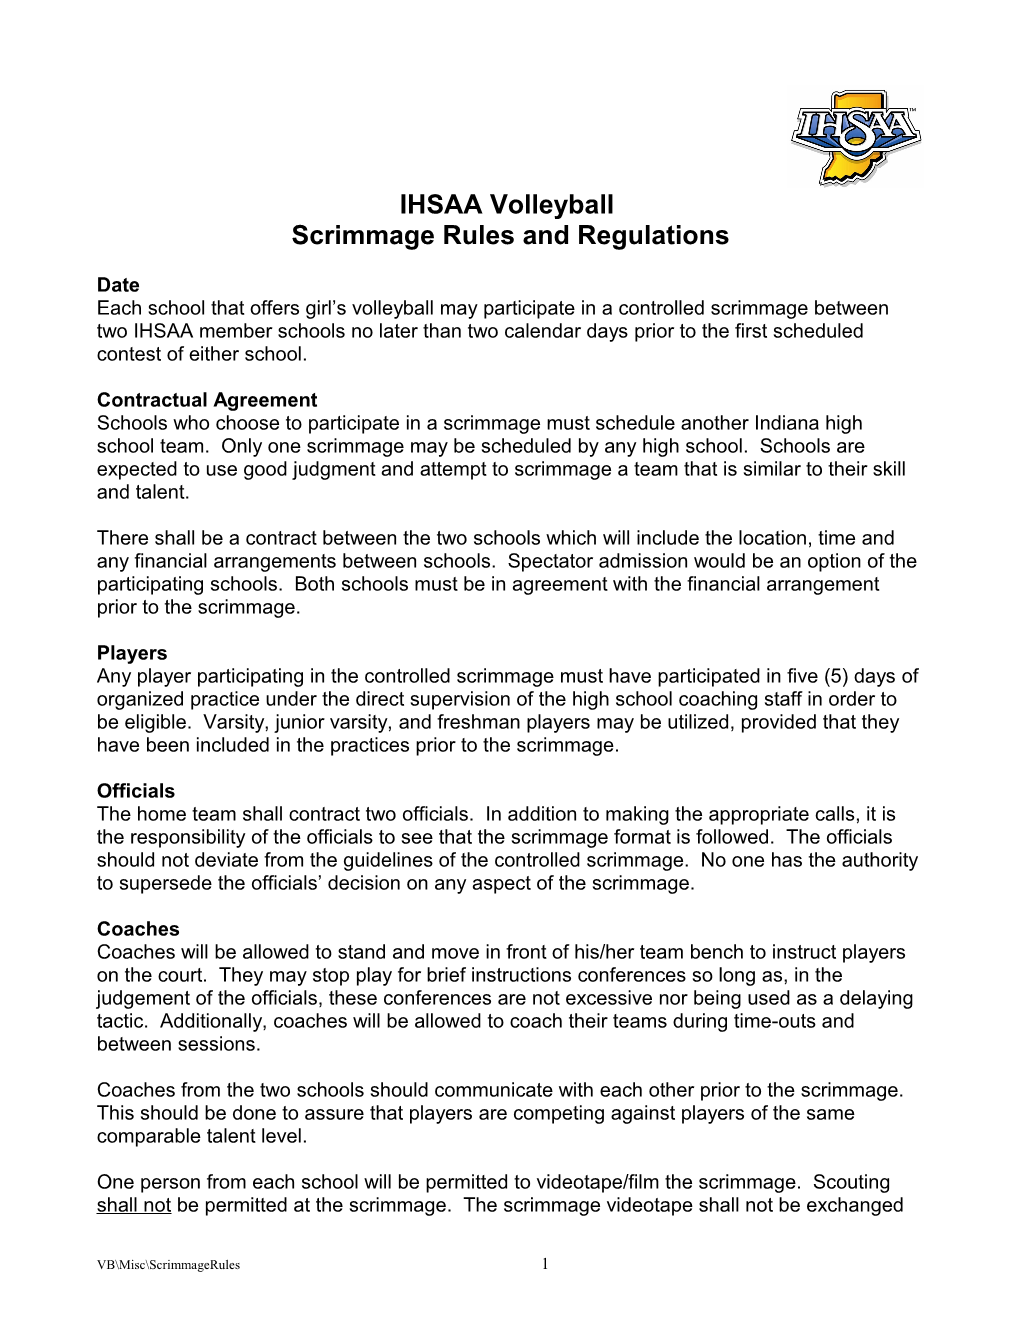 2003 Volleyball Scrimmage Rules and Regulations